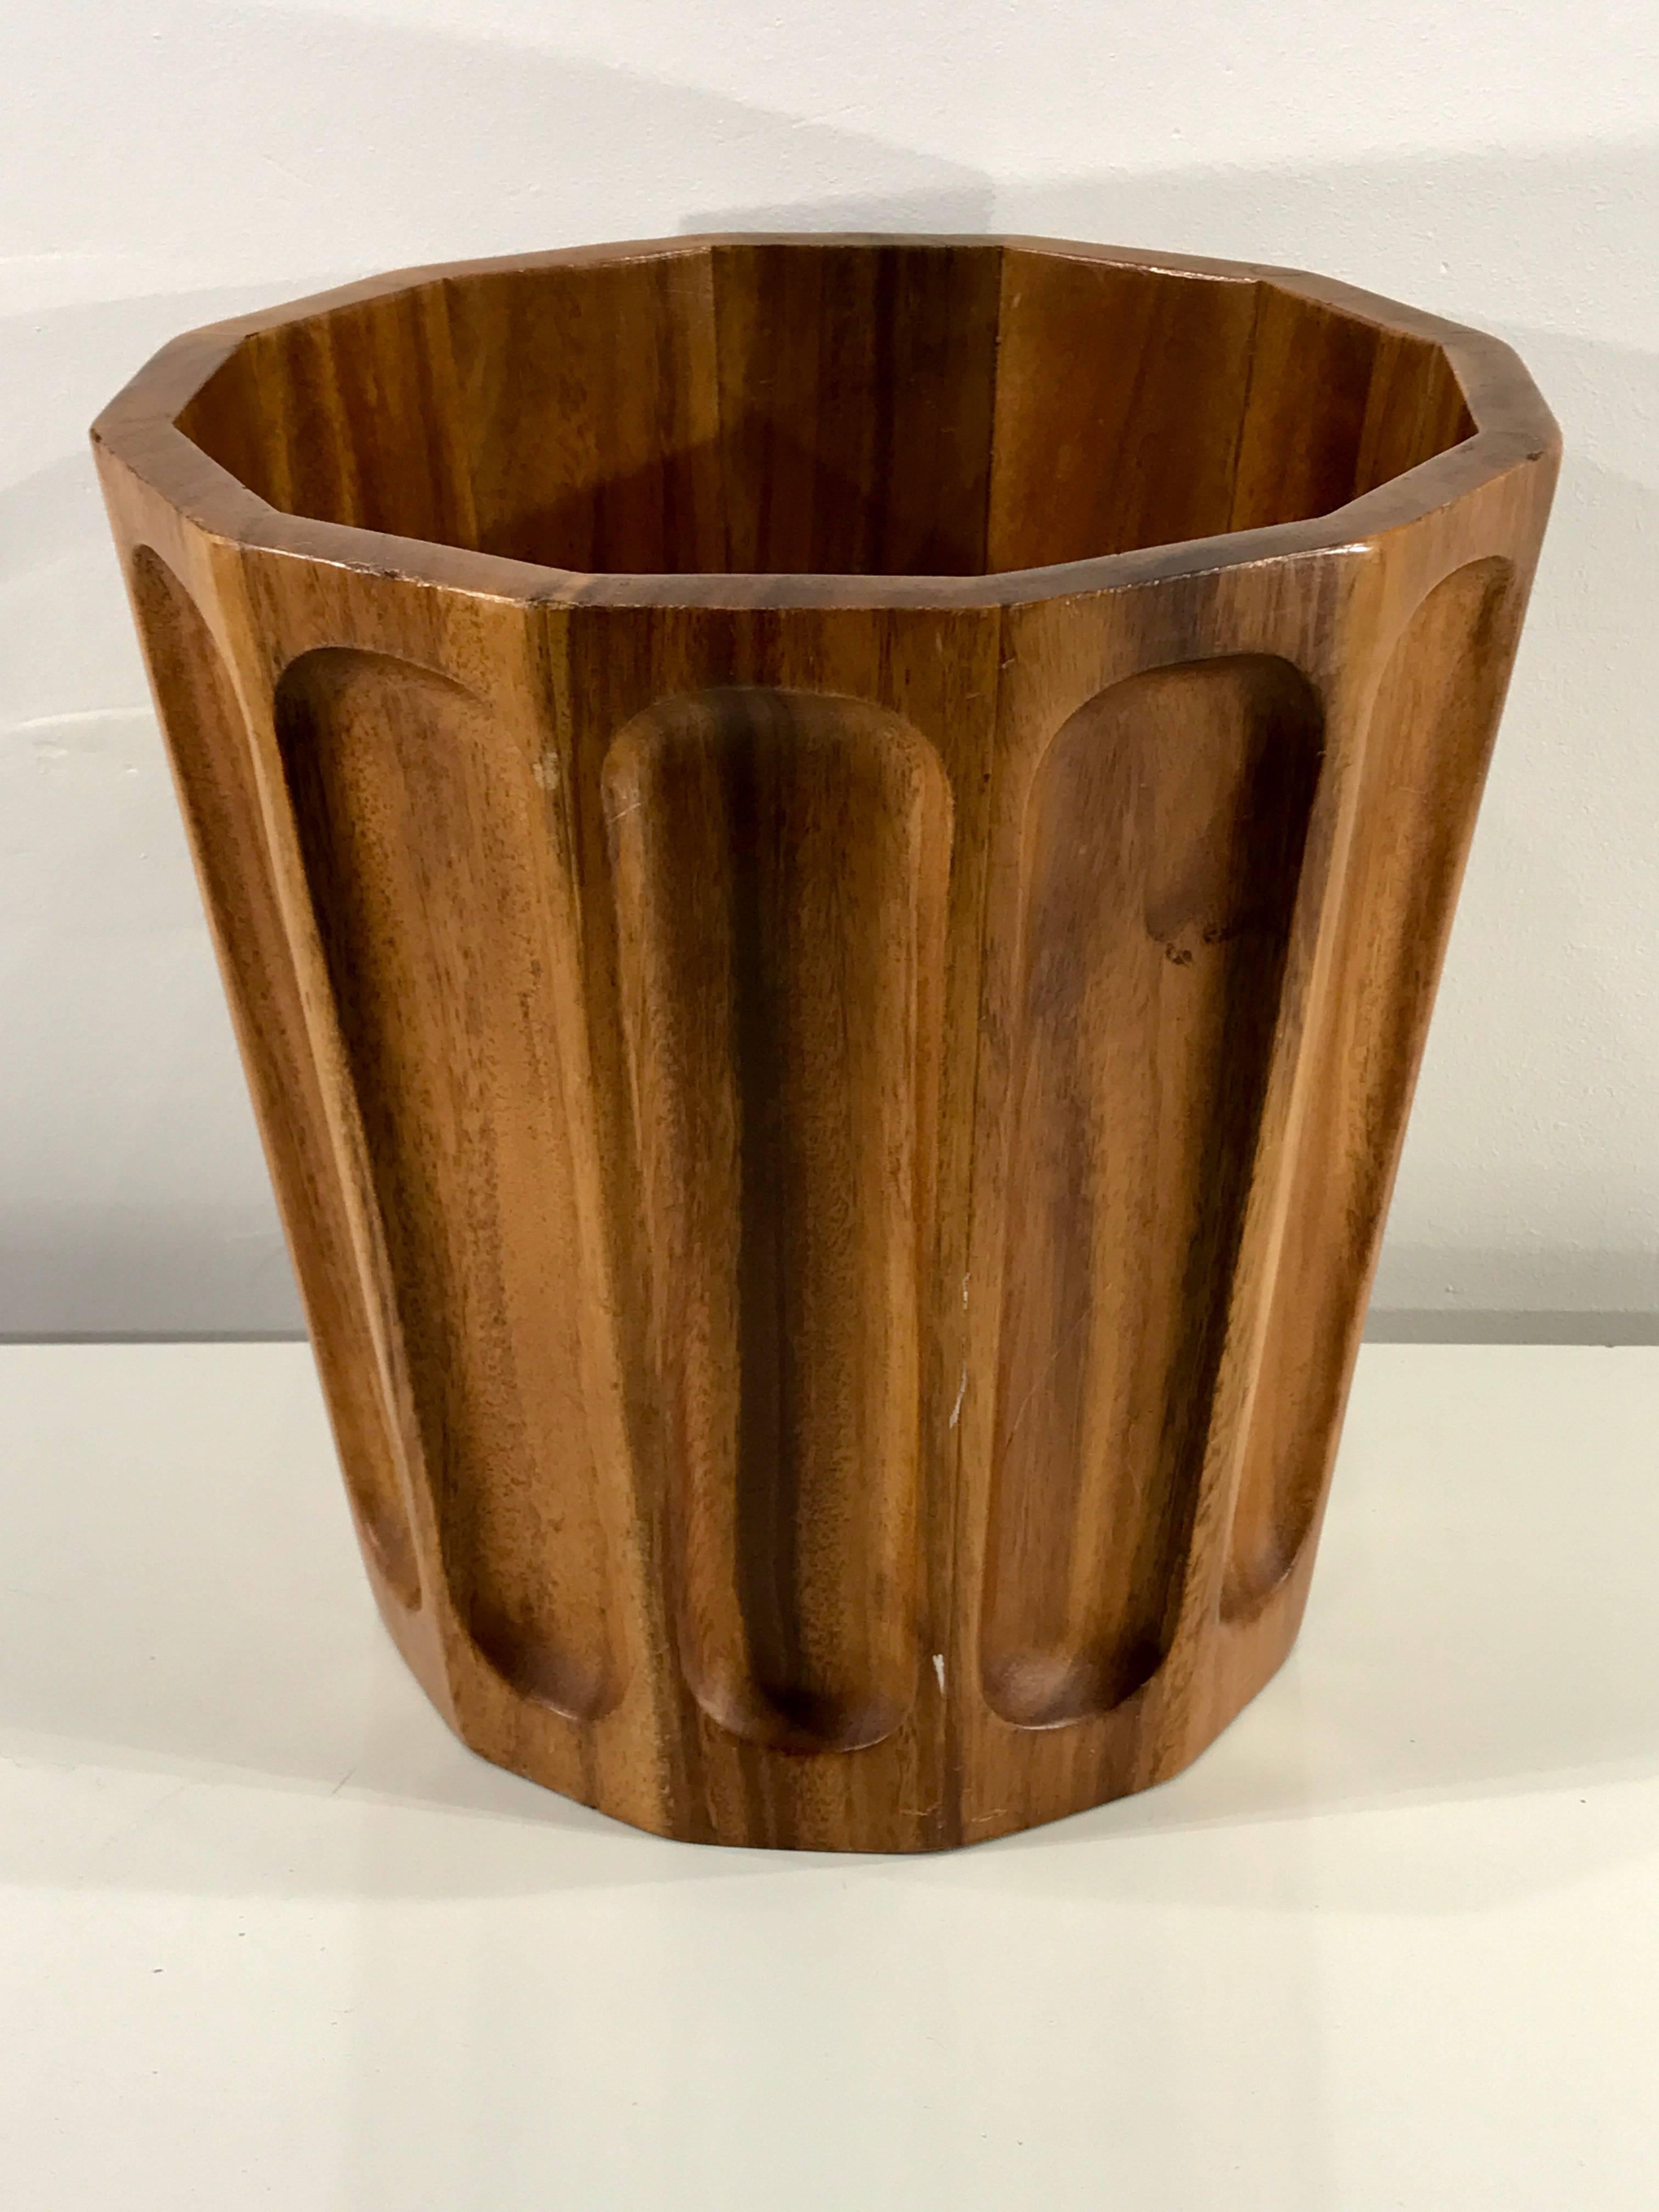 A period Danish modern sculpted teak trash can, measure: 12 inches high, 12 inches in diameter and 12 continuous fluted sides. Exquisitely crafted in untouched warm finished patinaed teak, with areas of varied reflective hues of copper tones. A